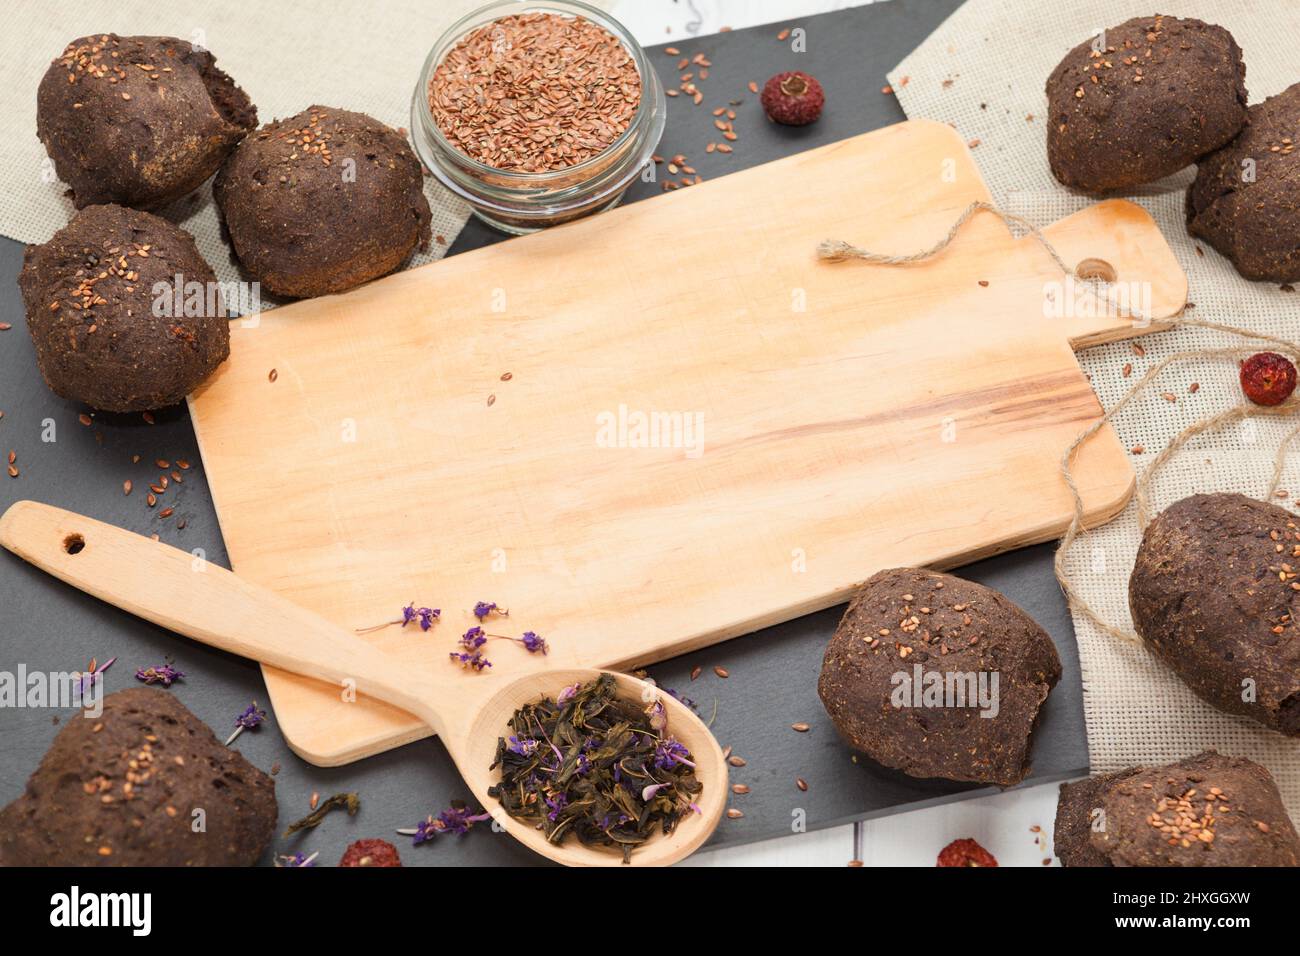 Homemade dietary flax bread buns with trencher close up view Stock Photo